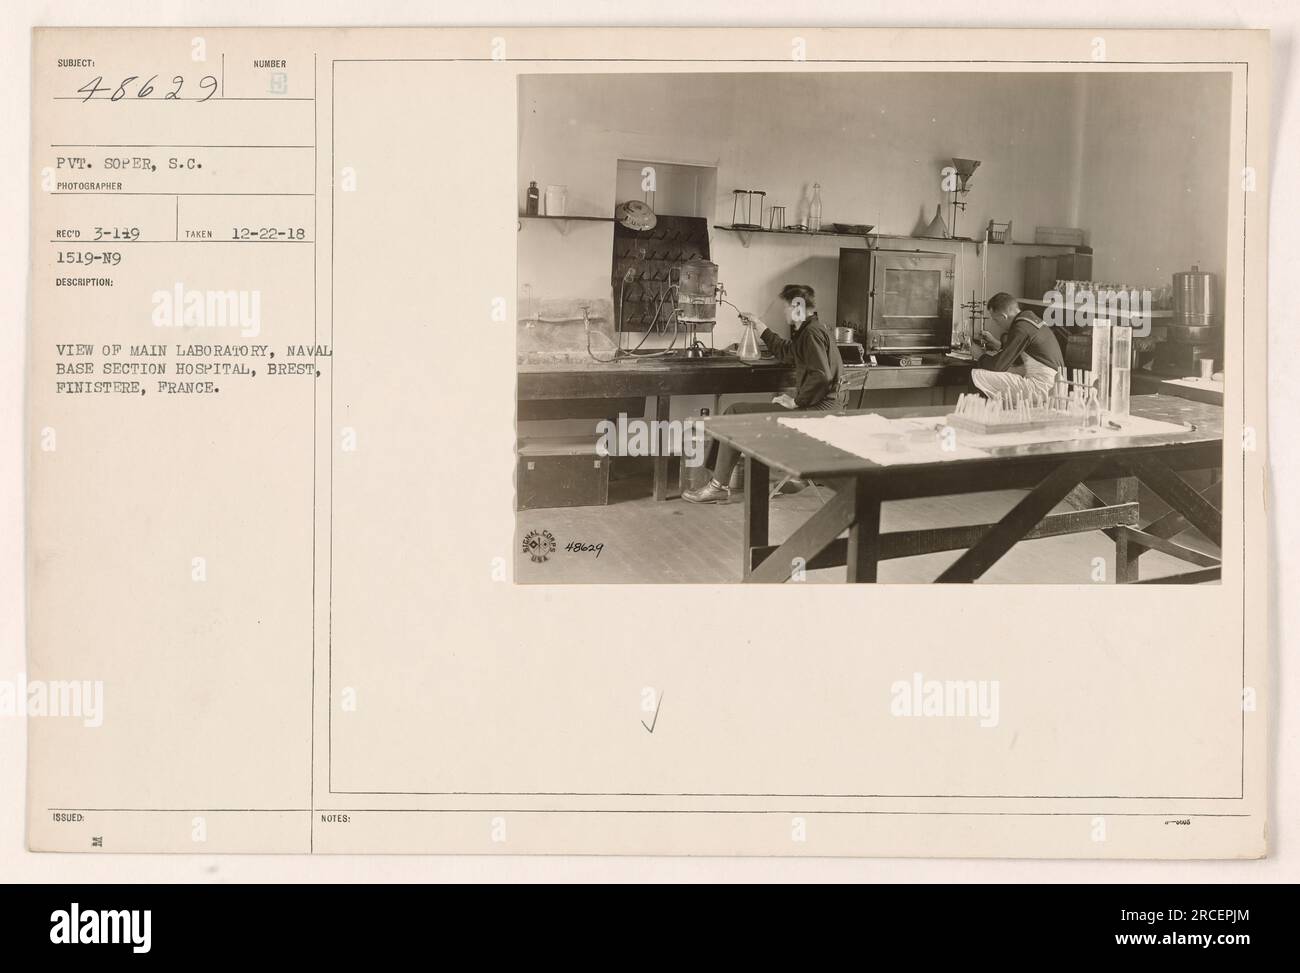 Image of the main laboratory at the Naval Base Section Hospital in Brest, Finistere, France. The photograph was taken by SC Photographer Reco on 12-22-18. The picture features Private Soper, ID number 48629, working in the lab. E MP4 notes that there were 21 takes of this image. Stock Photo